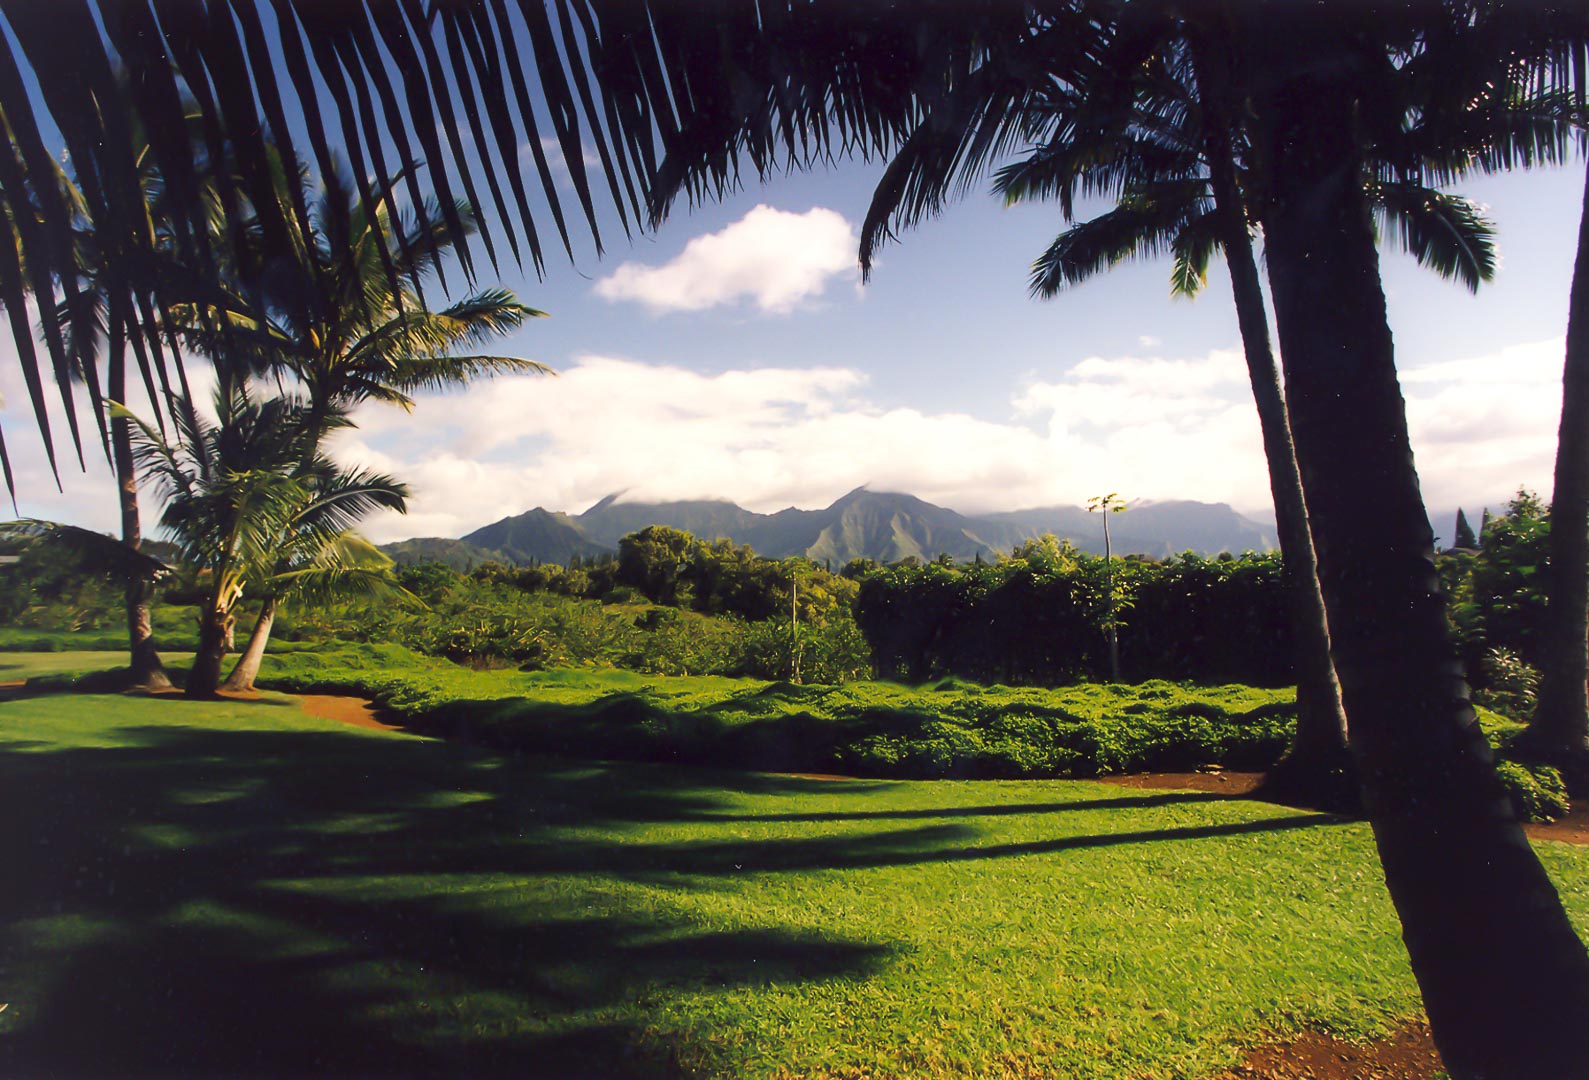 A scenic view from VRI's Alii Kai Resort in Hawaii